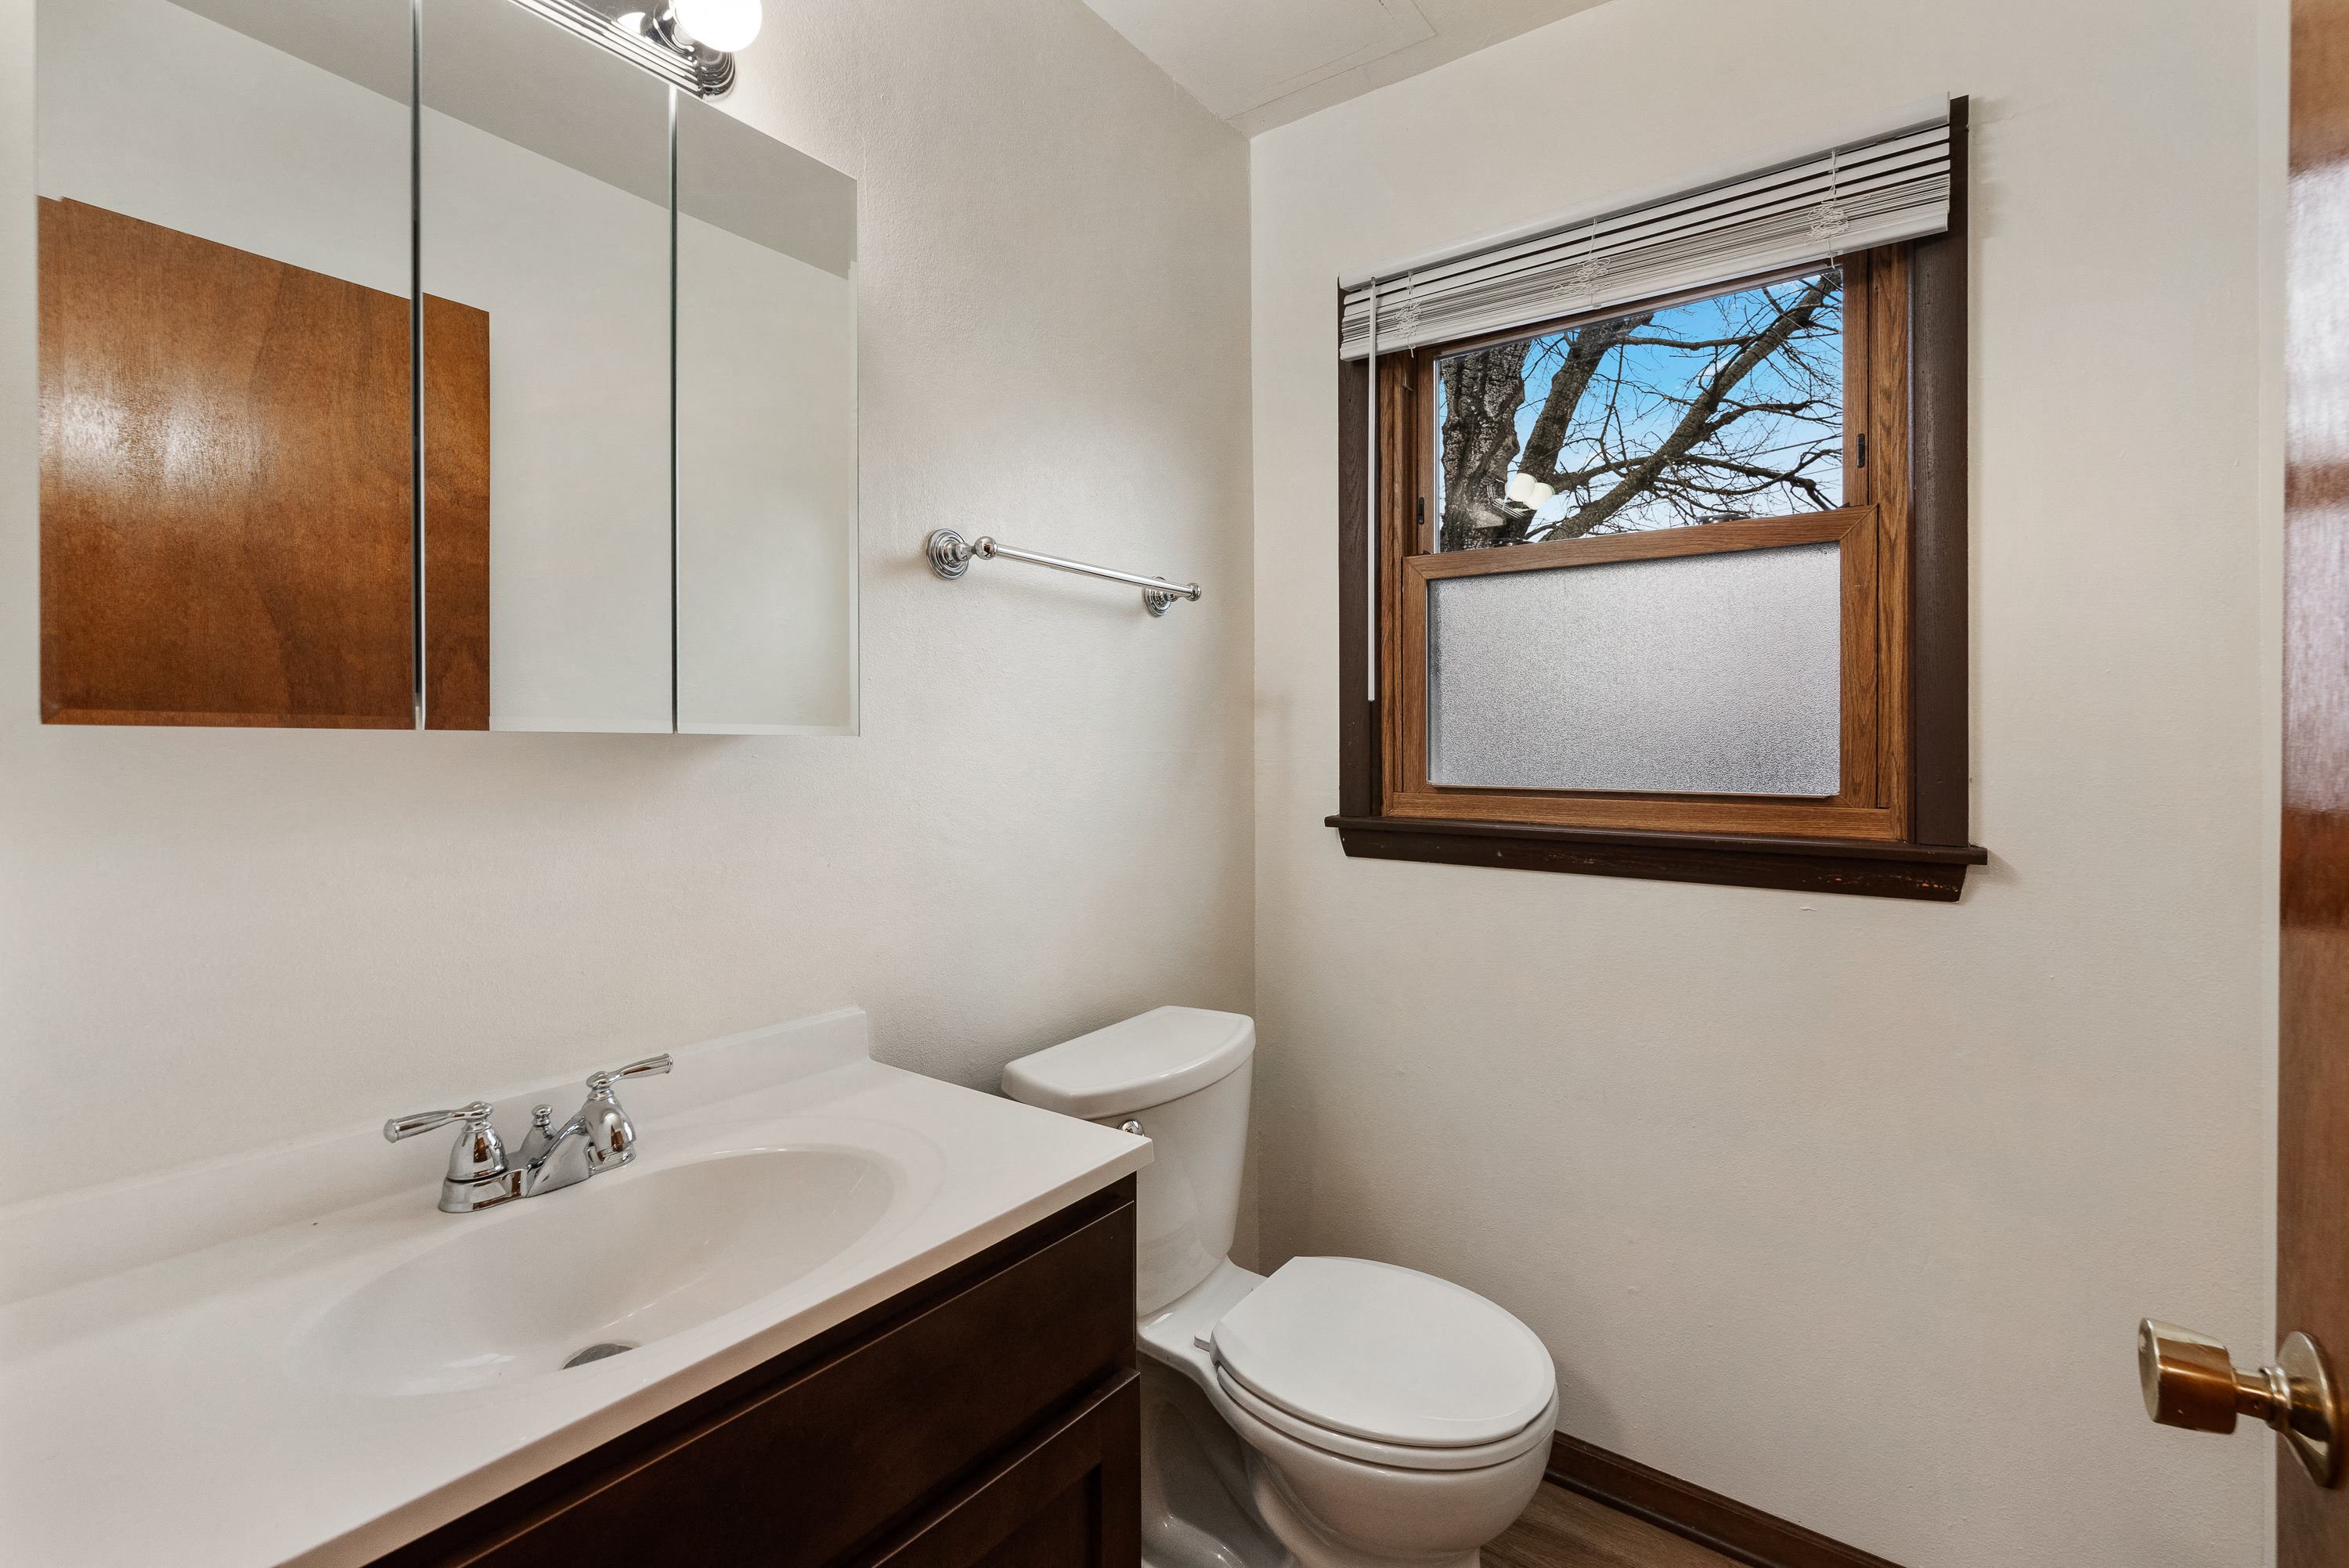 90th Street Townhomes Guest Bathroom